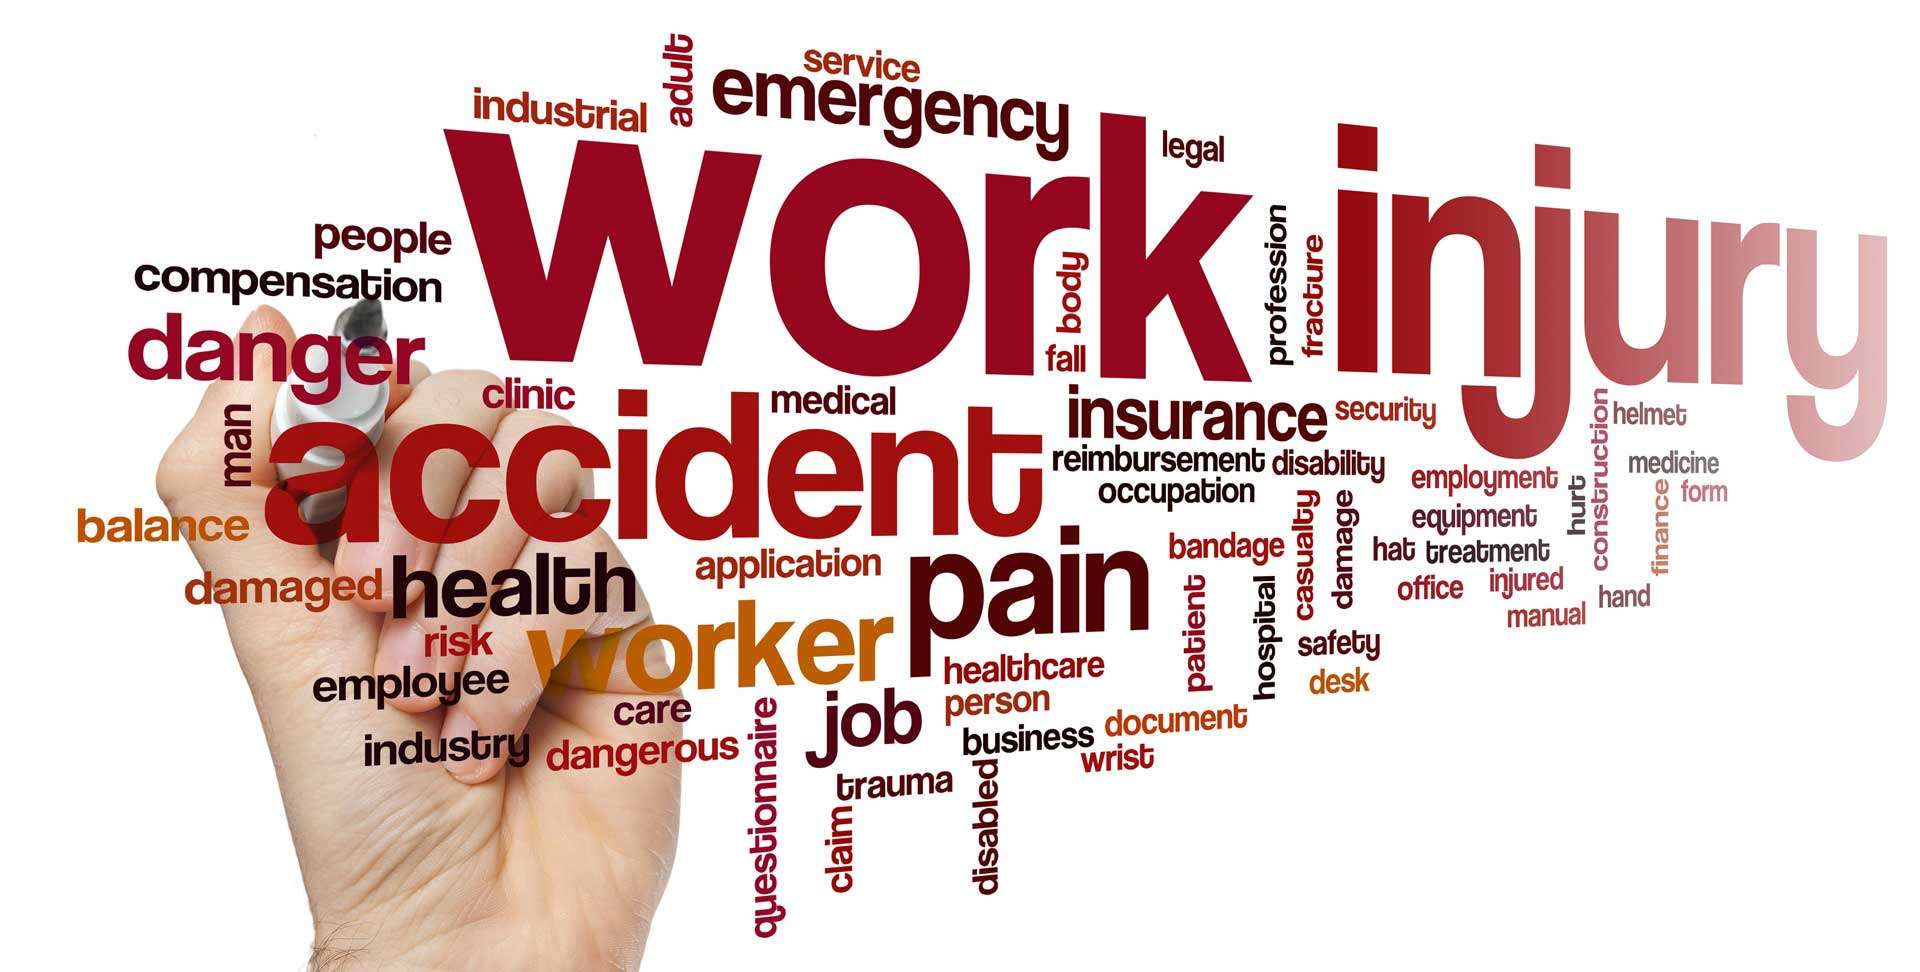 A human hand writing words associated with Compensable Referrals for psychological and physical injuries from work injuries and motor vehicle accidents specialising in pain and anxiety management